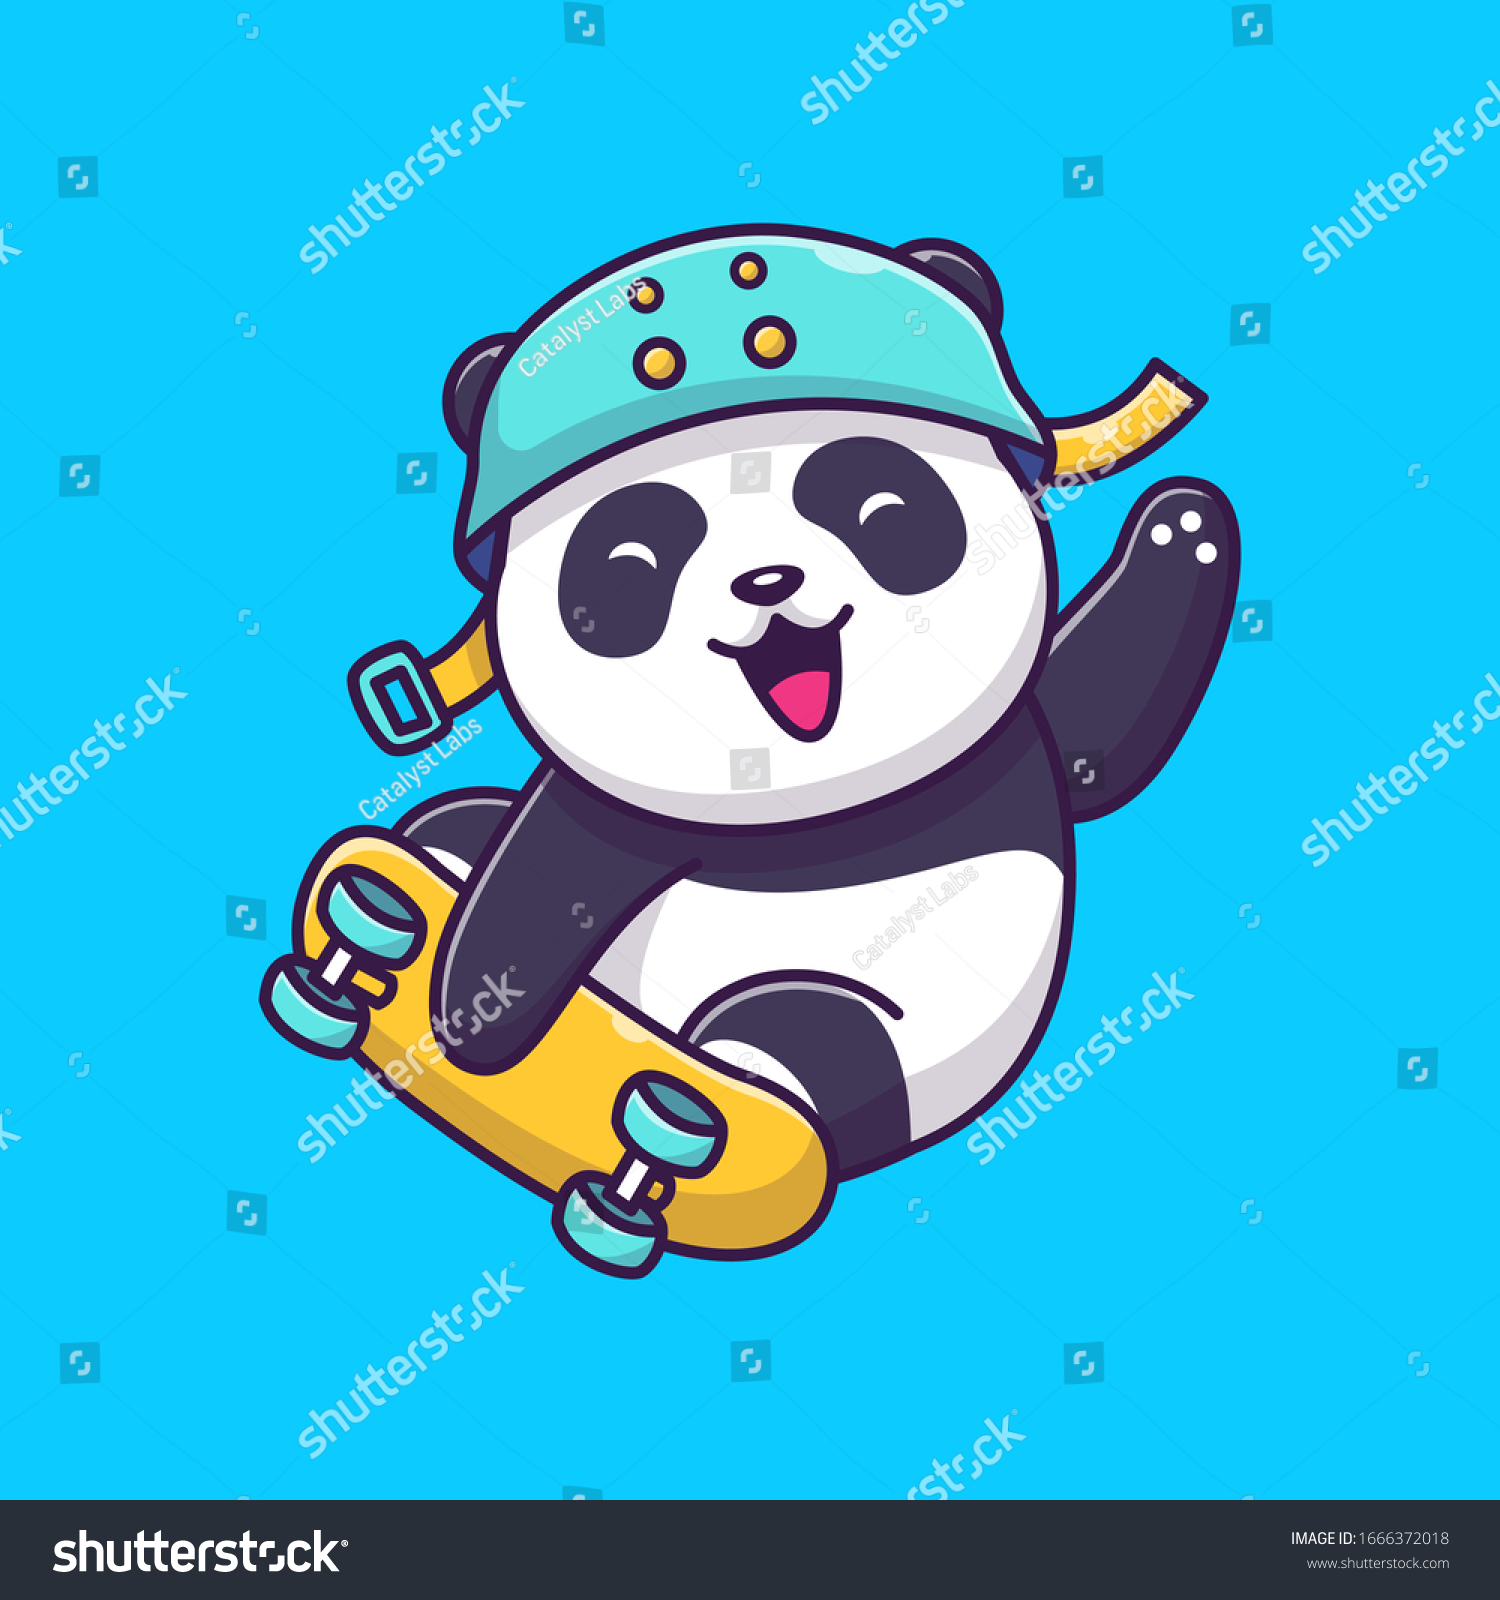 SVG of Cute Panda Play Skateboard Vector Icon Illustration. Panda Mascot Cartoon Character. Animal Icon Concept White Isolated. Flat Cartoon Style Suitable for Web Landing Page, Banner, Flyer, Sticker, Card svg